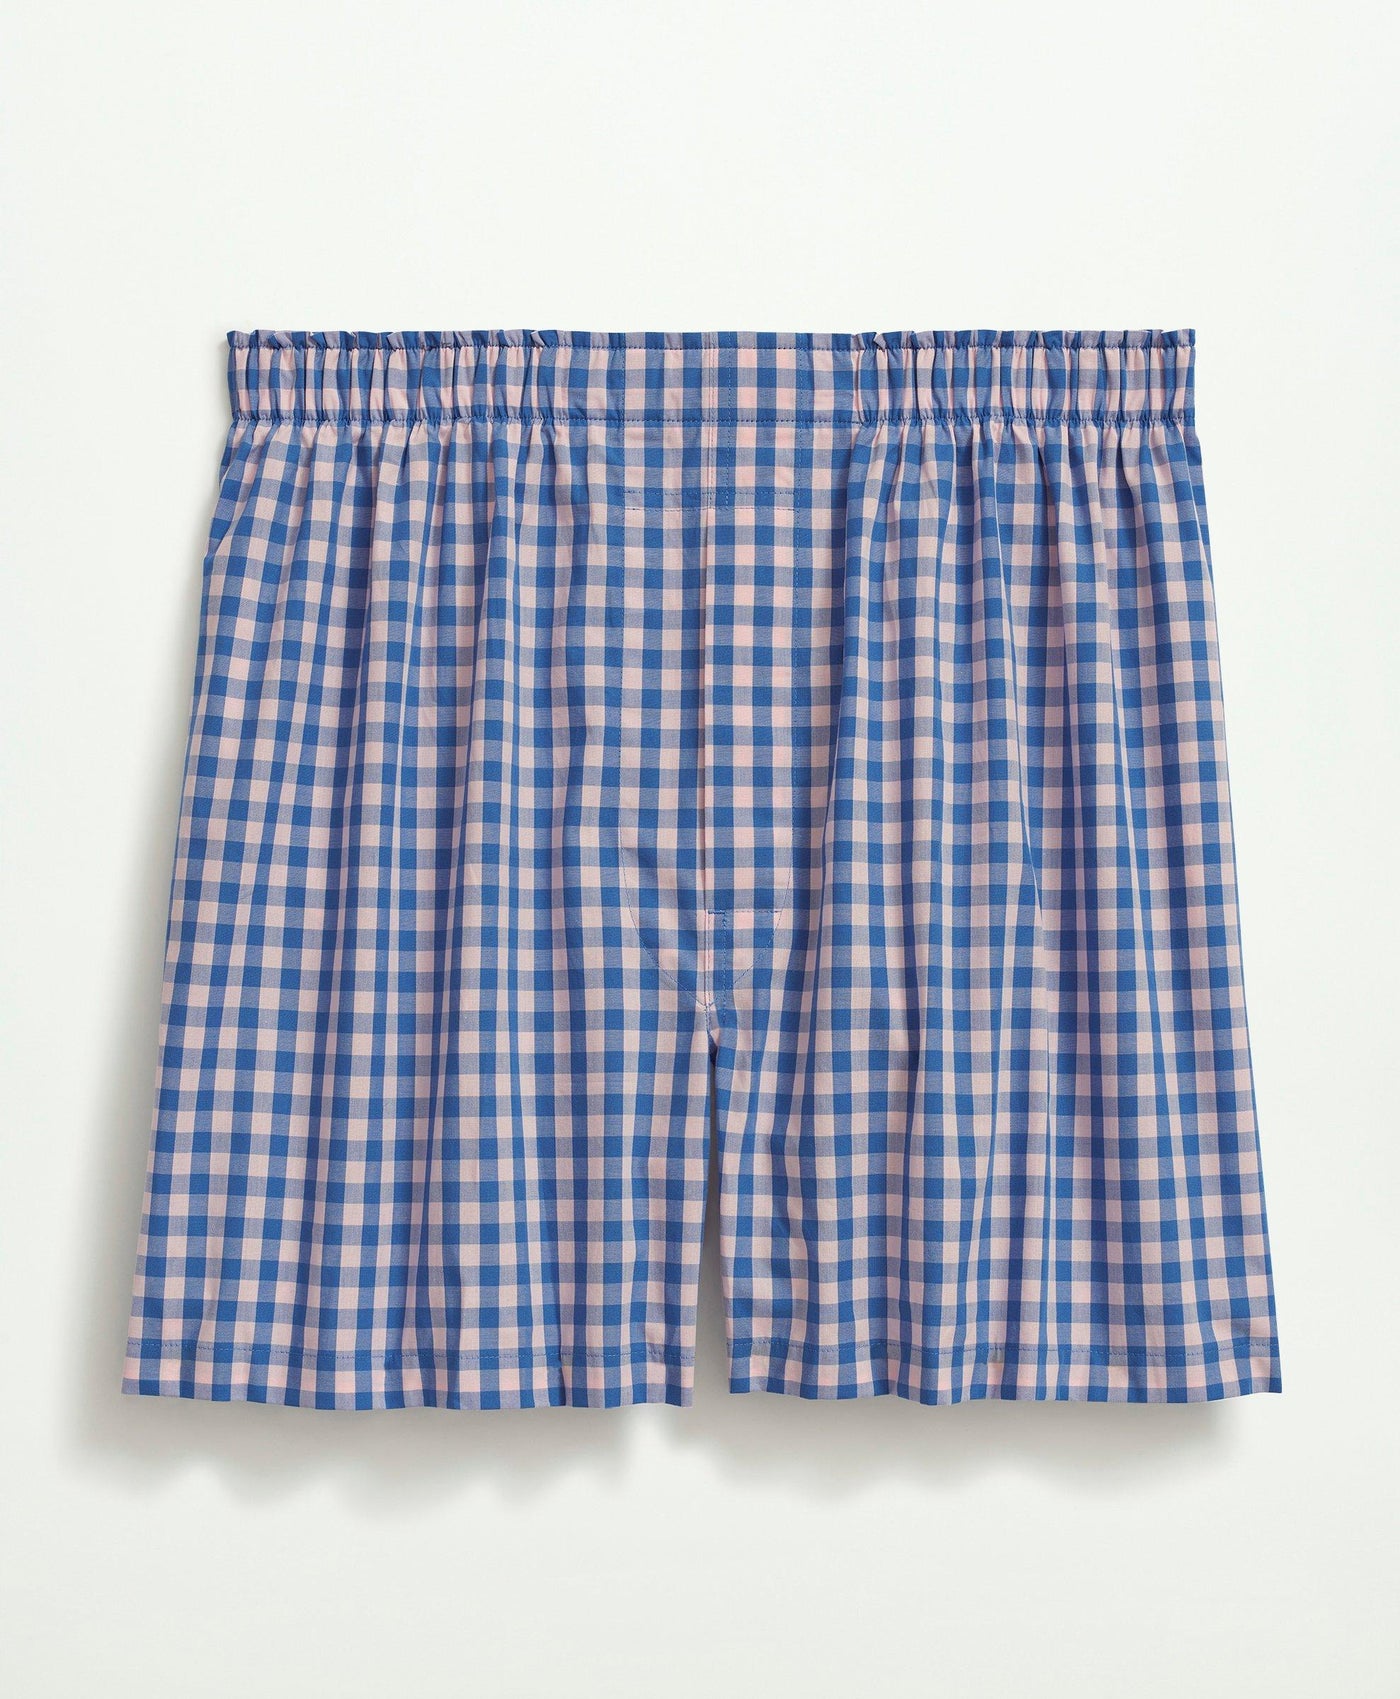 Cotton Broadcloth Gingham Boxers - Brooks Brothers Canada